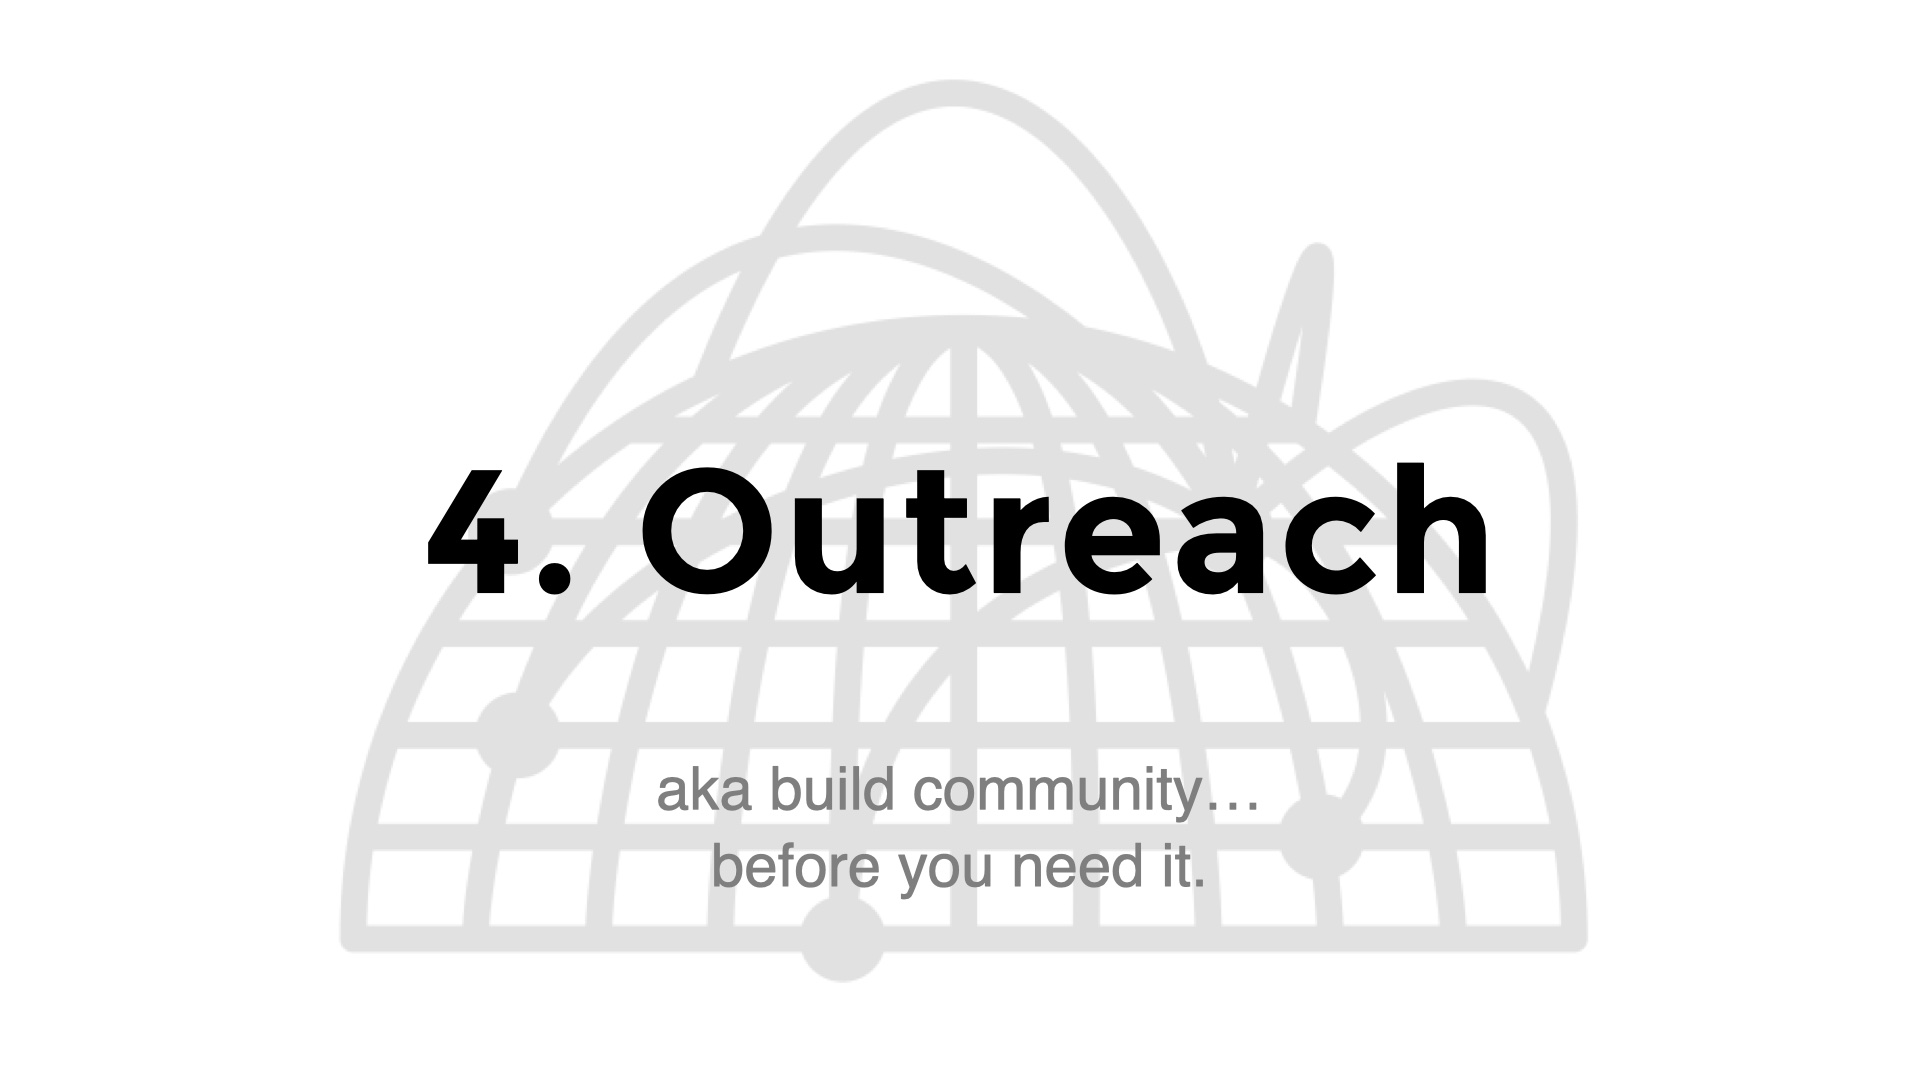 Title slide: 4. Outreach. Subtitle: aka build communityâ€¦
before you need it.